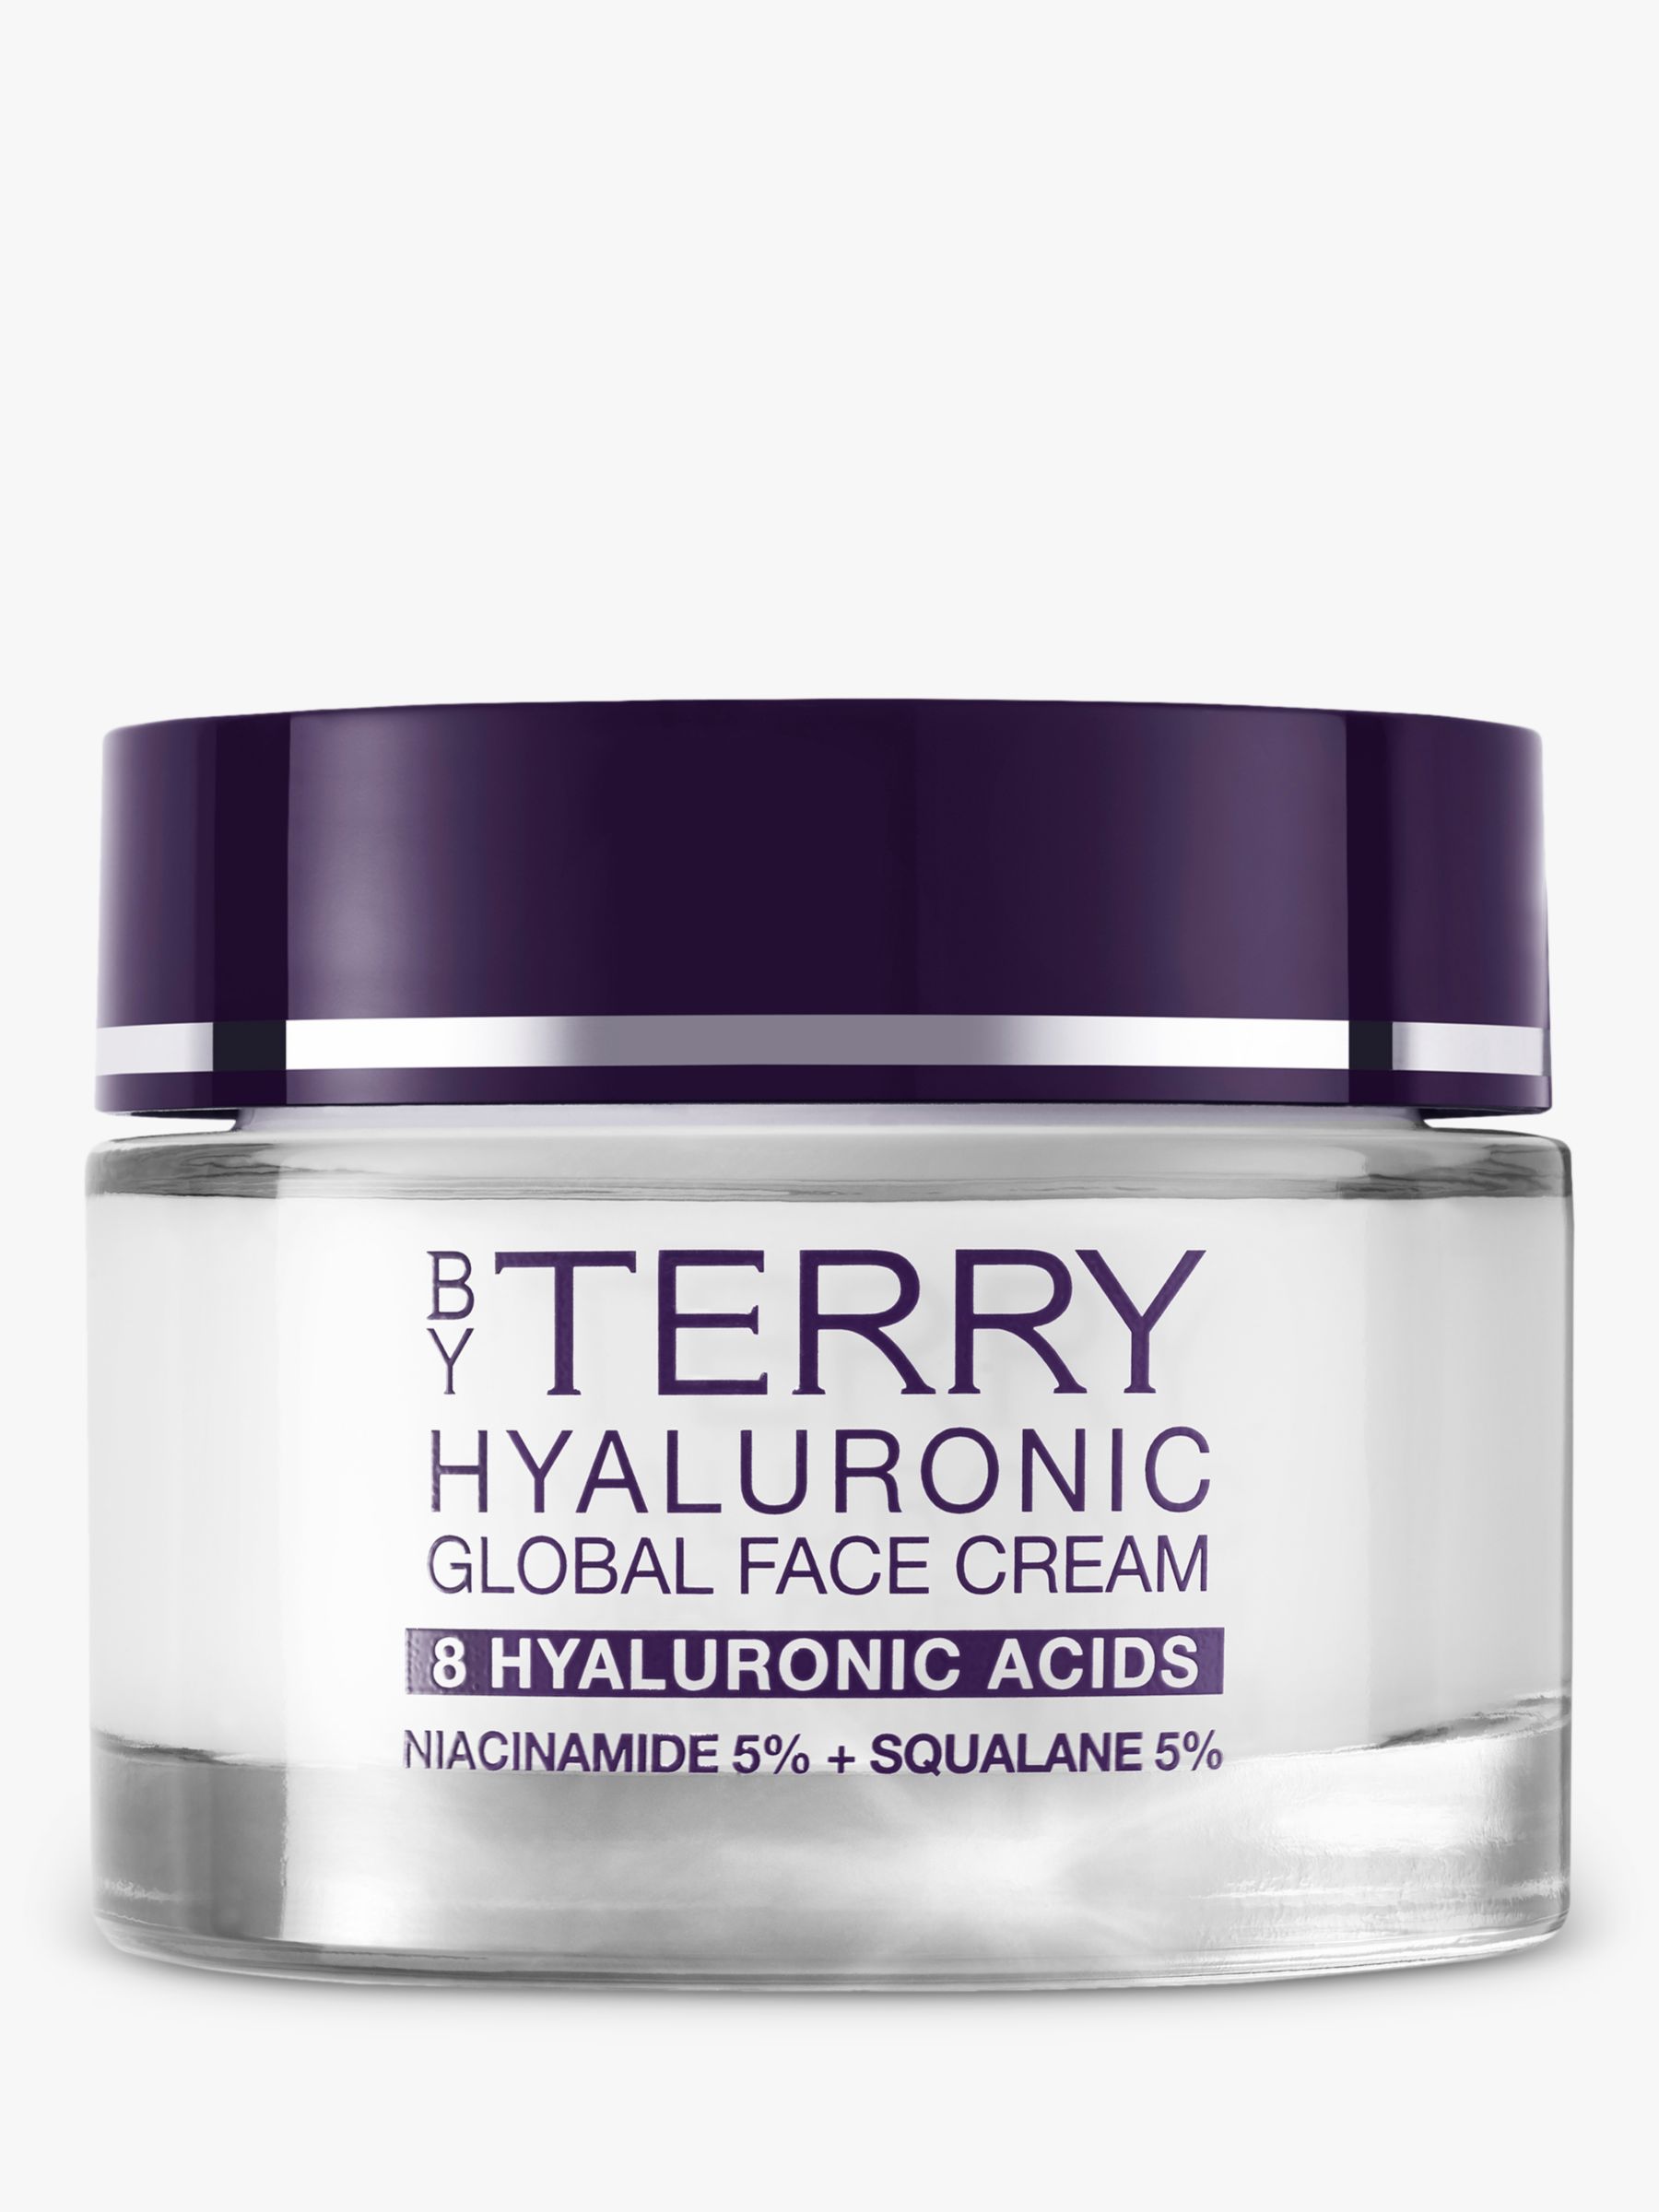 BY TERRY Hyaluronic Global Face Cream, 50ml 1